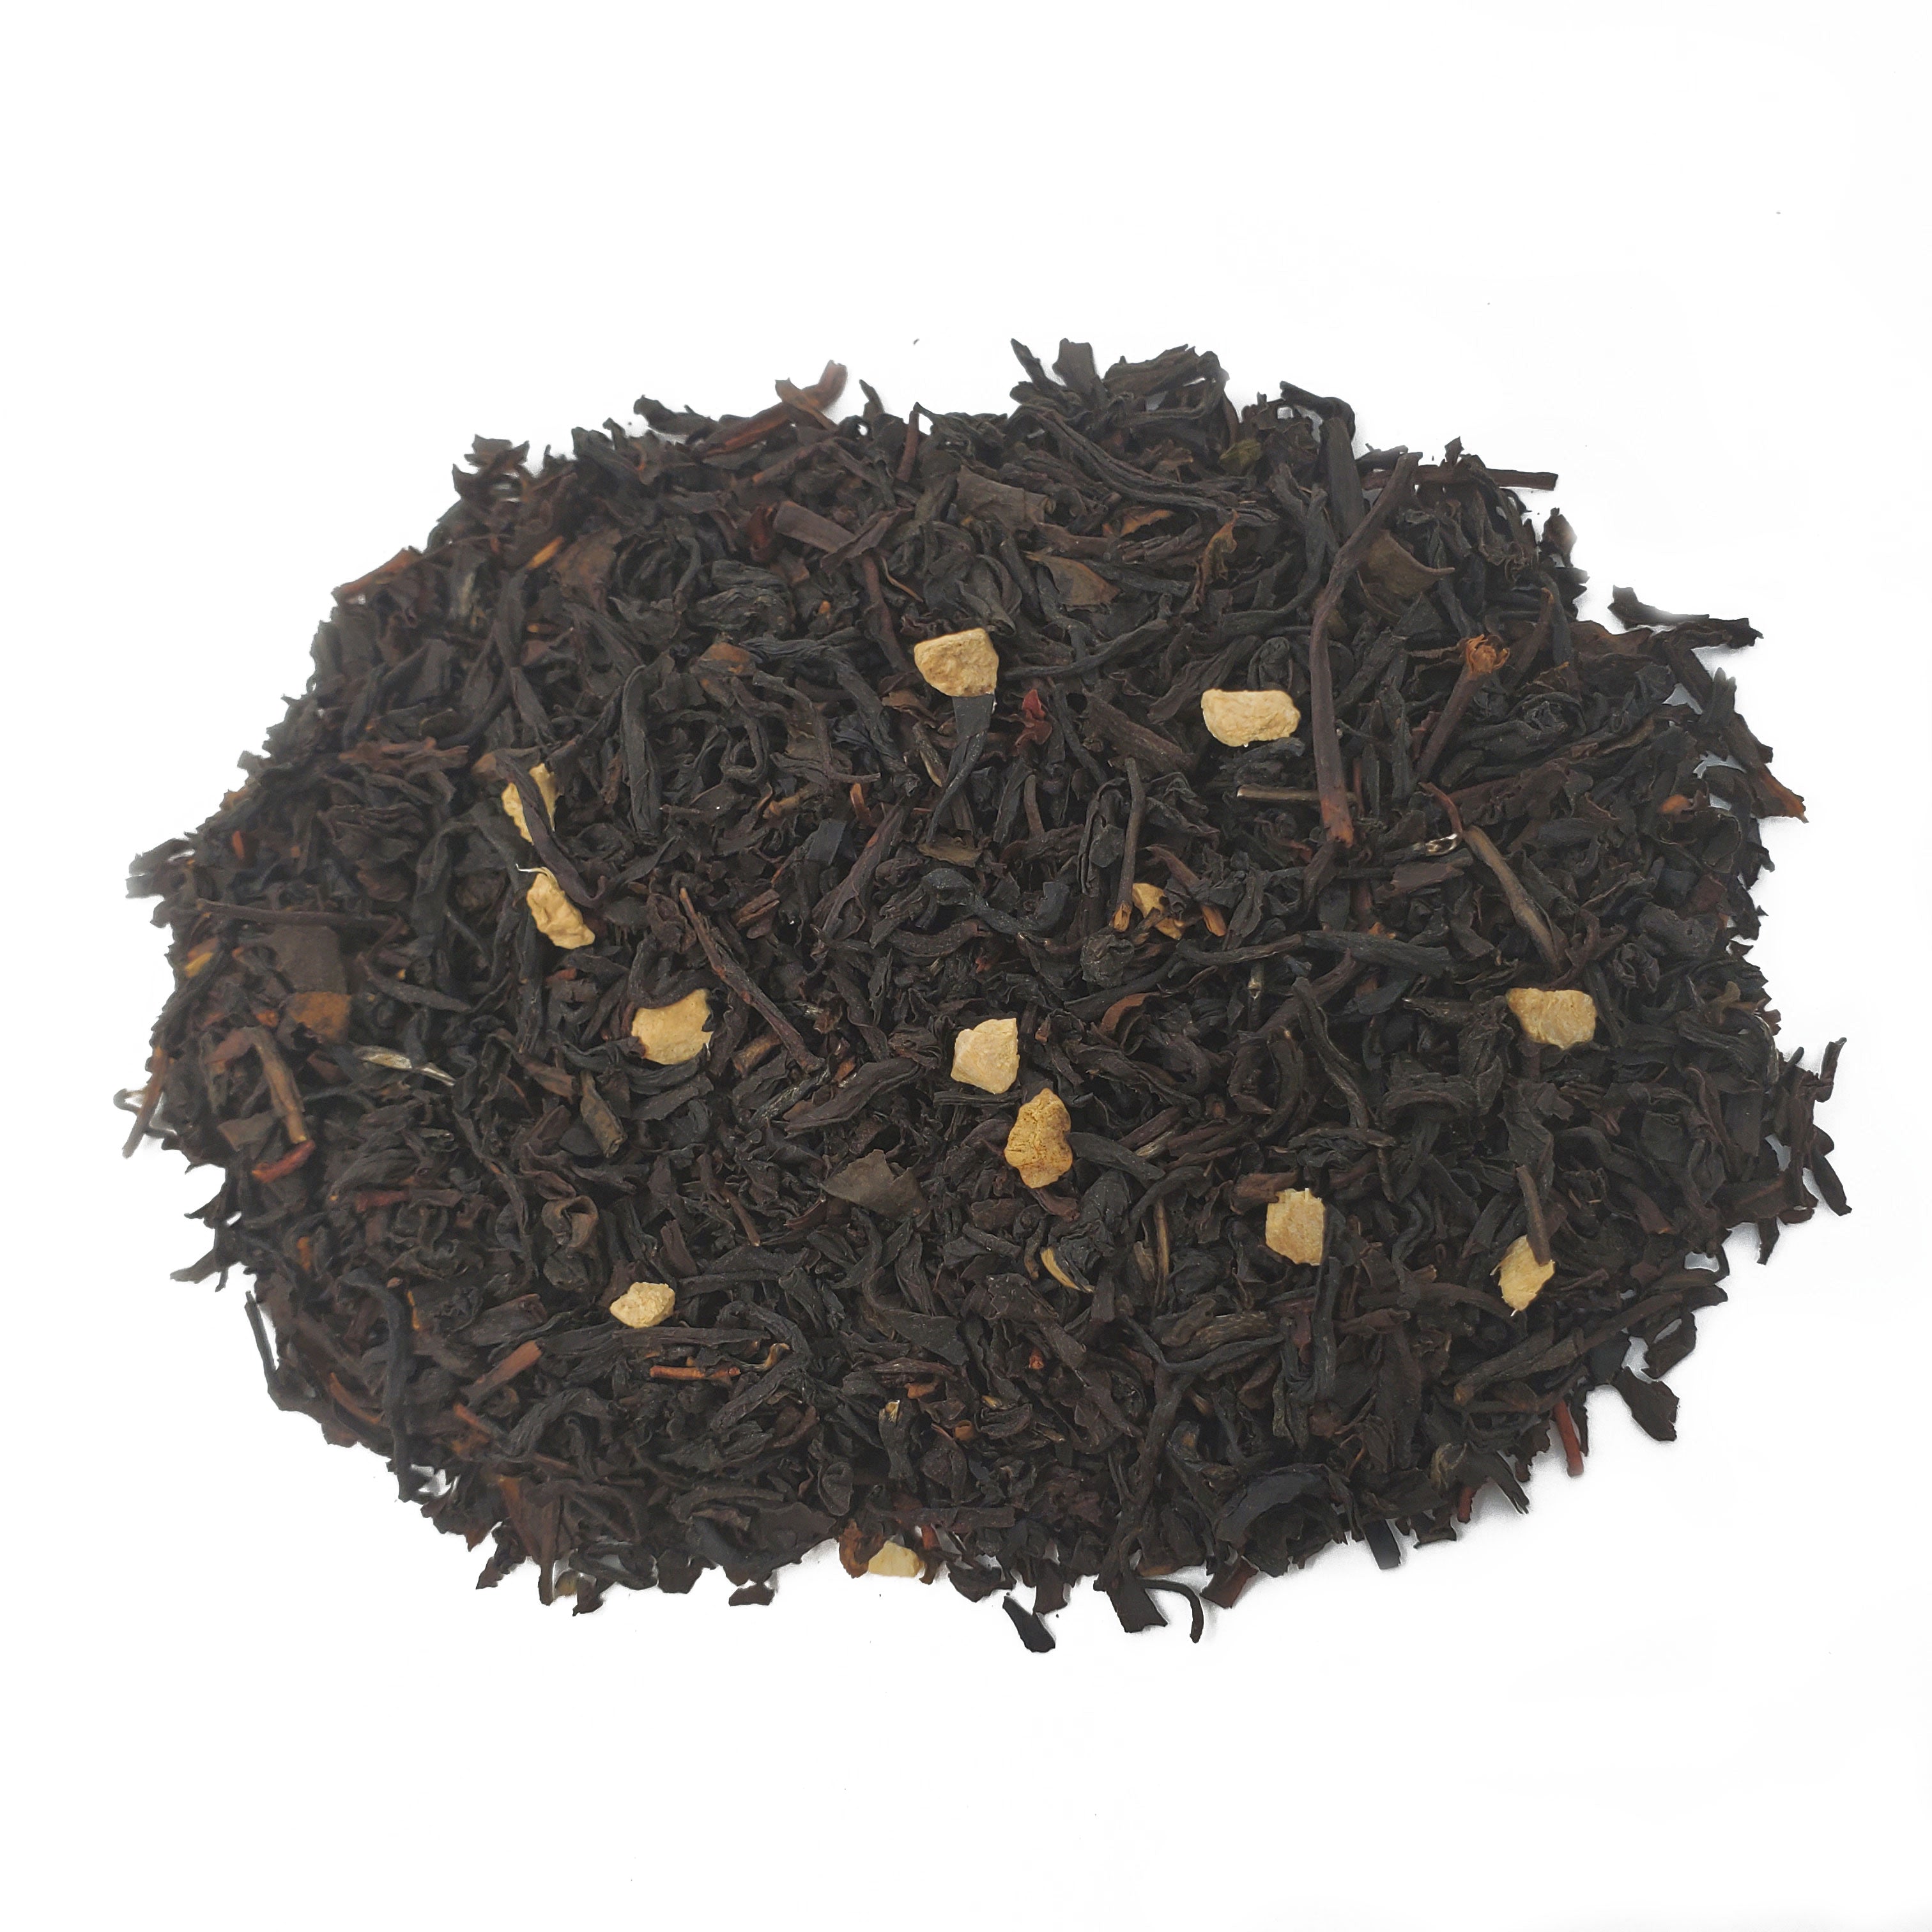  Sweet & Spicy Ginger Black Tea by Tea and Whisk Tea and Whisk Perfumarie